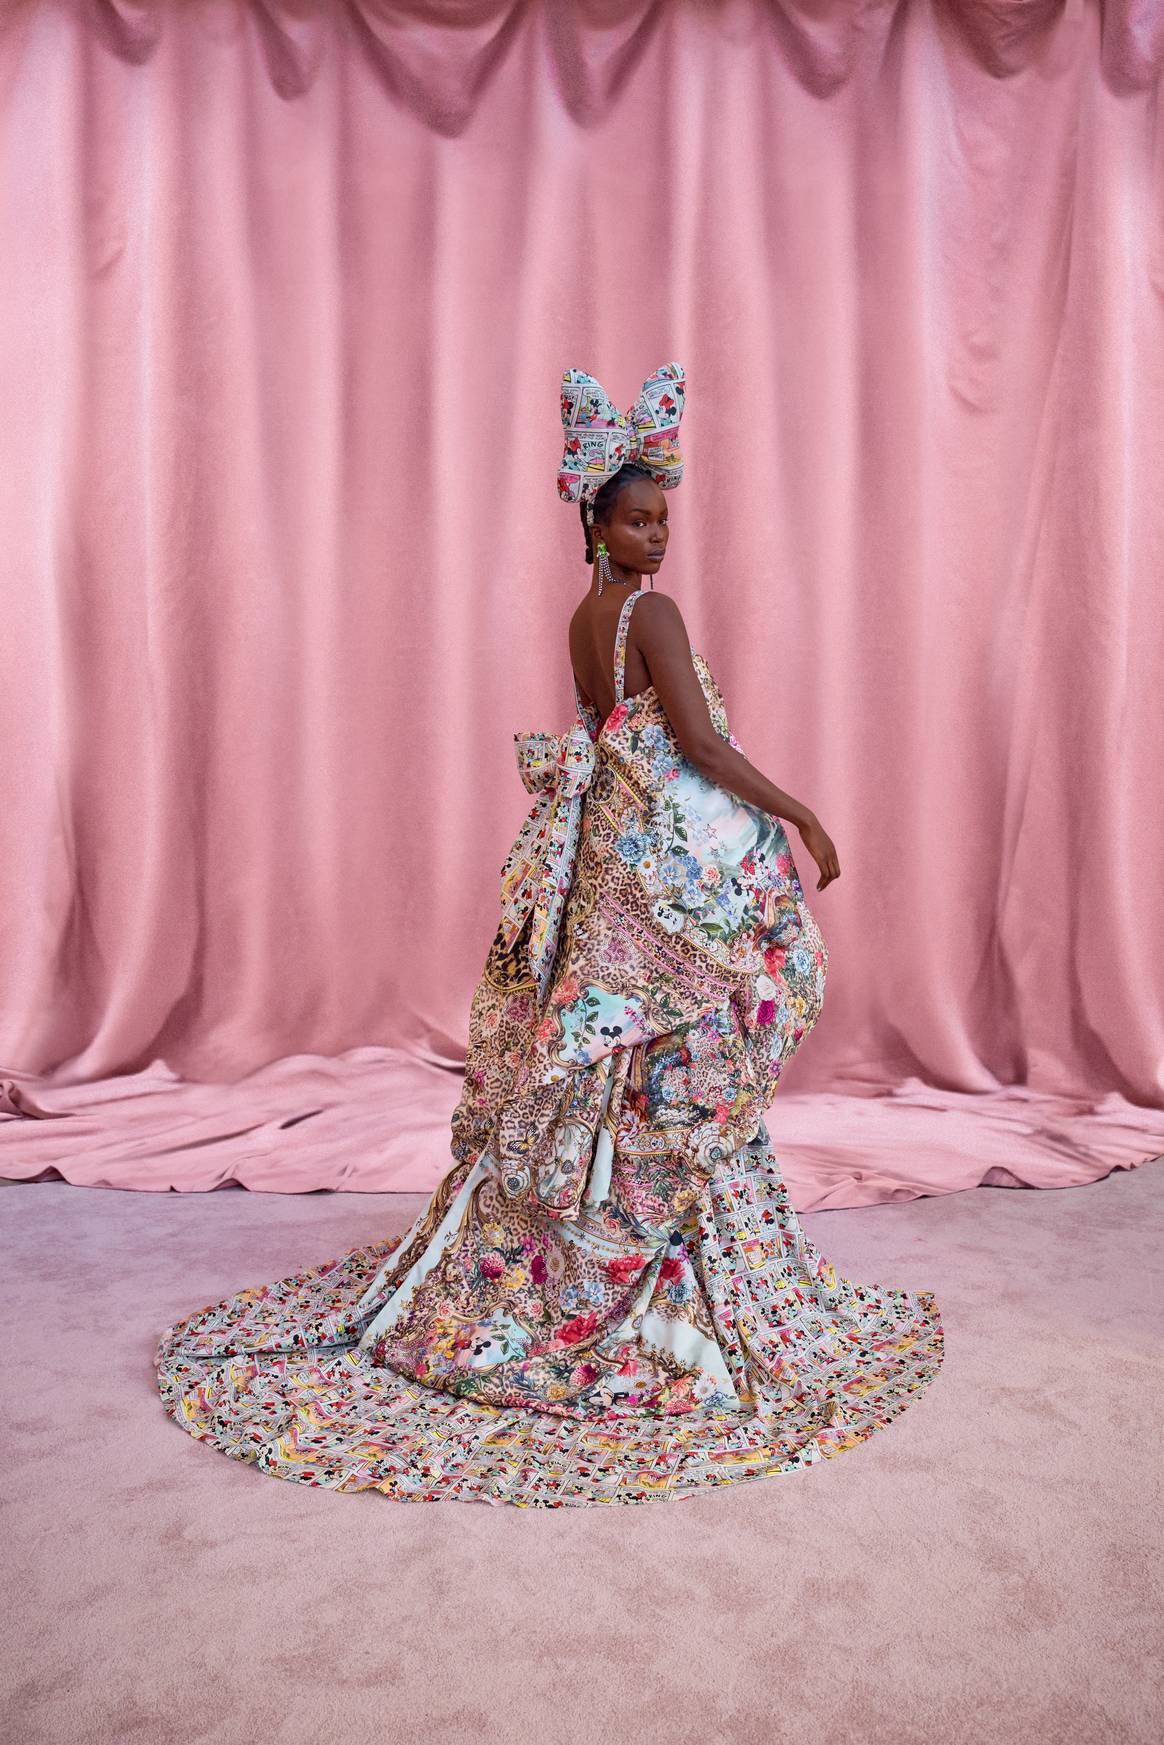 Disney Create 100 couture gown by Camilla Franks